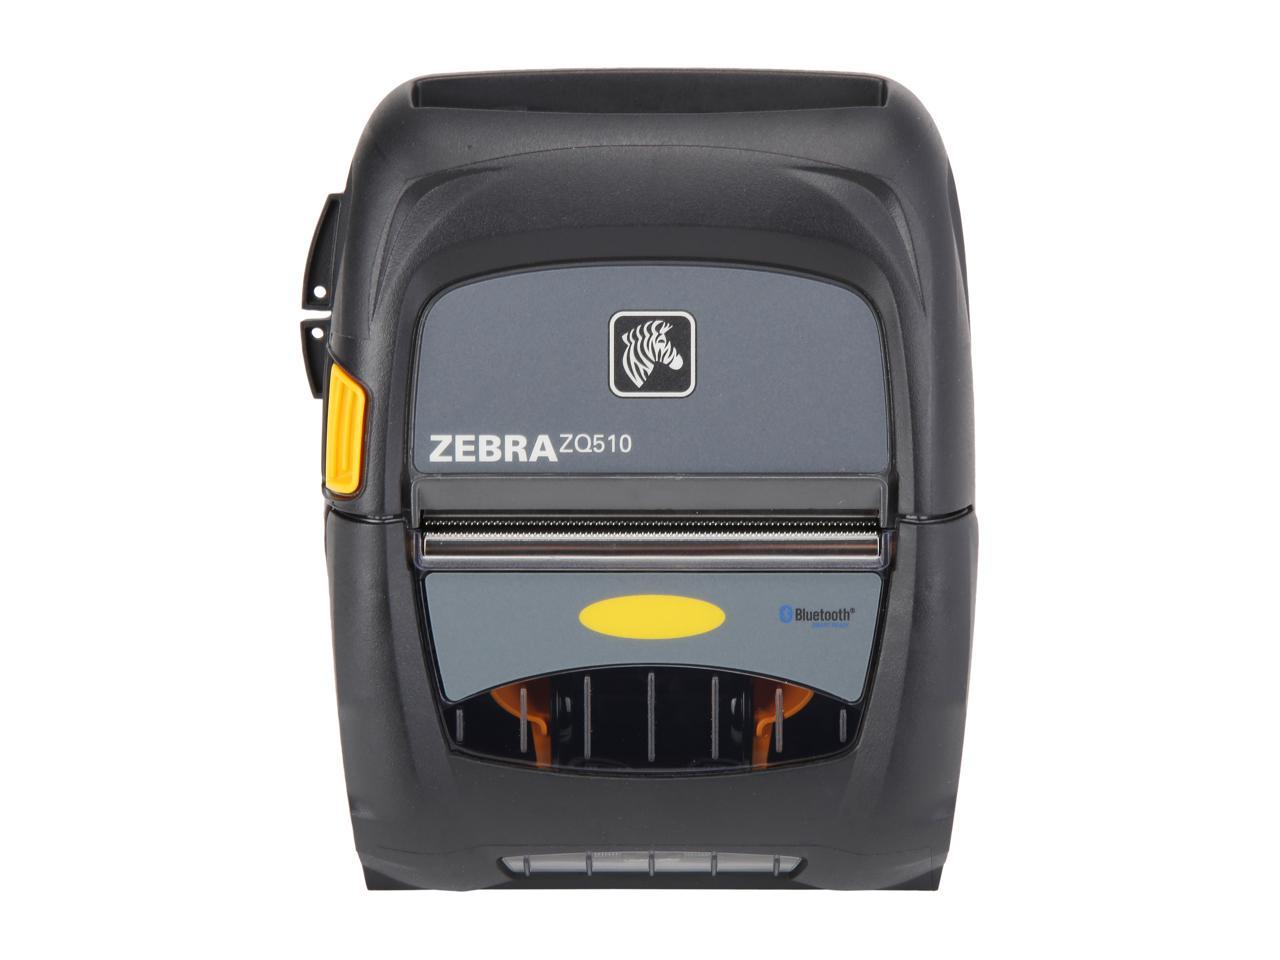 Zebra Zq510 3 Mobile Direct Thermal Receipt And Label Printer 203 Dpi Bluetooth 40 Linered 4878